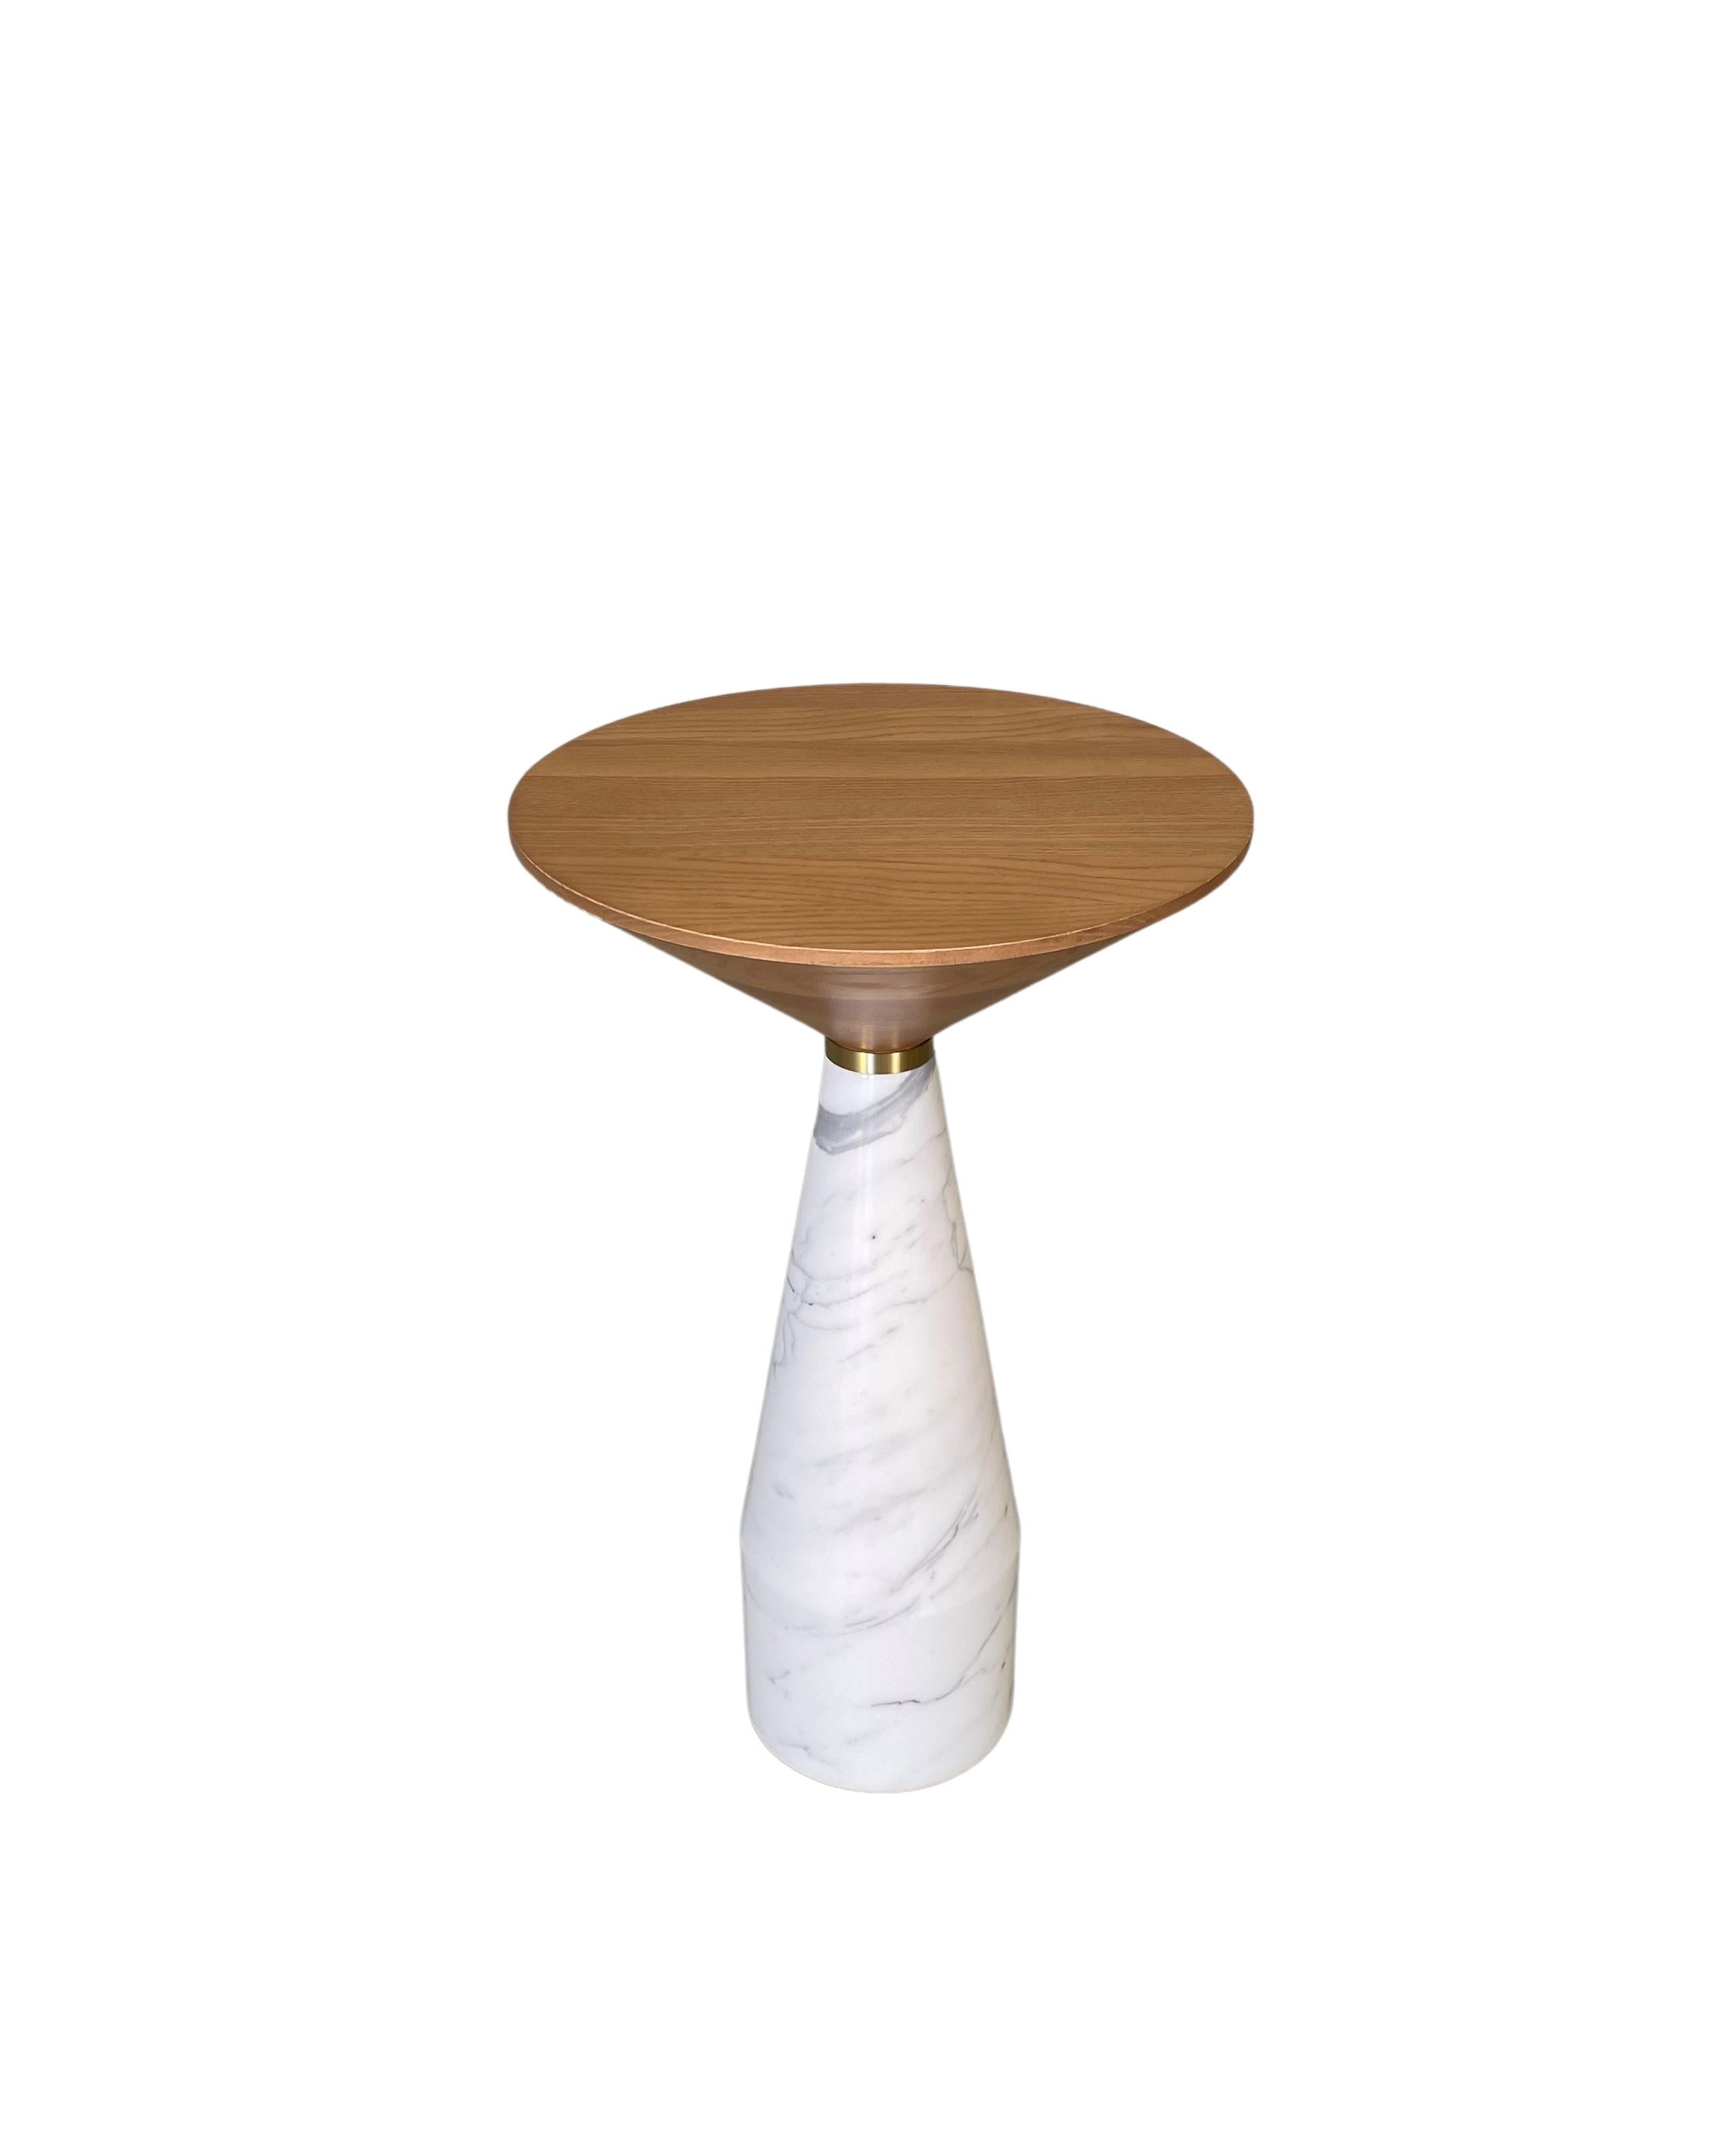 Cino is a new table designed by Italian-Canadian designer Libero Rutilo for Morelato
made of solid turned marble with hand turned top in solid ash wood, available in different wood finishes 
Dimension D 37 H 61 cm 
Weight approx 25 kg.
 

 